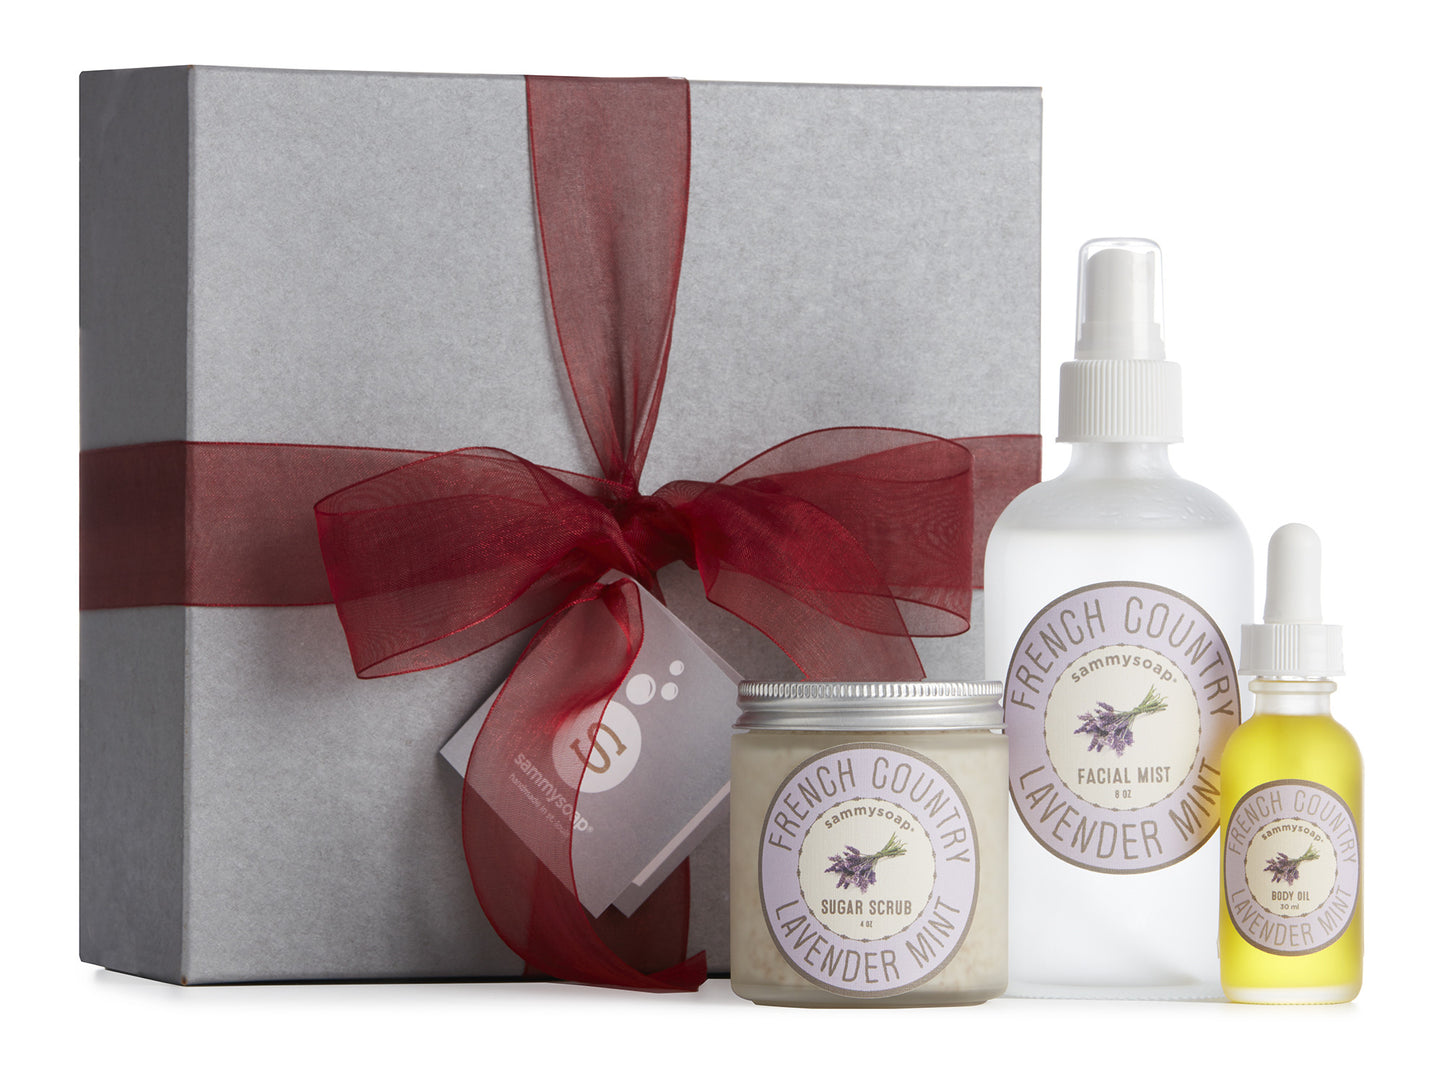 French Country Lavender Mint Collection Gift Box: Body Polish, Facial Mist, and Body Oil